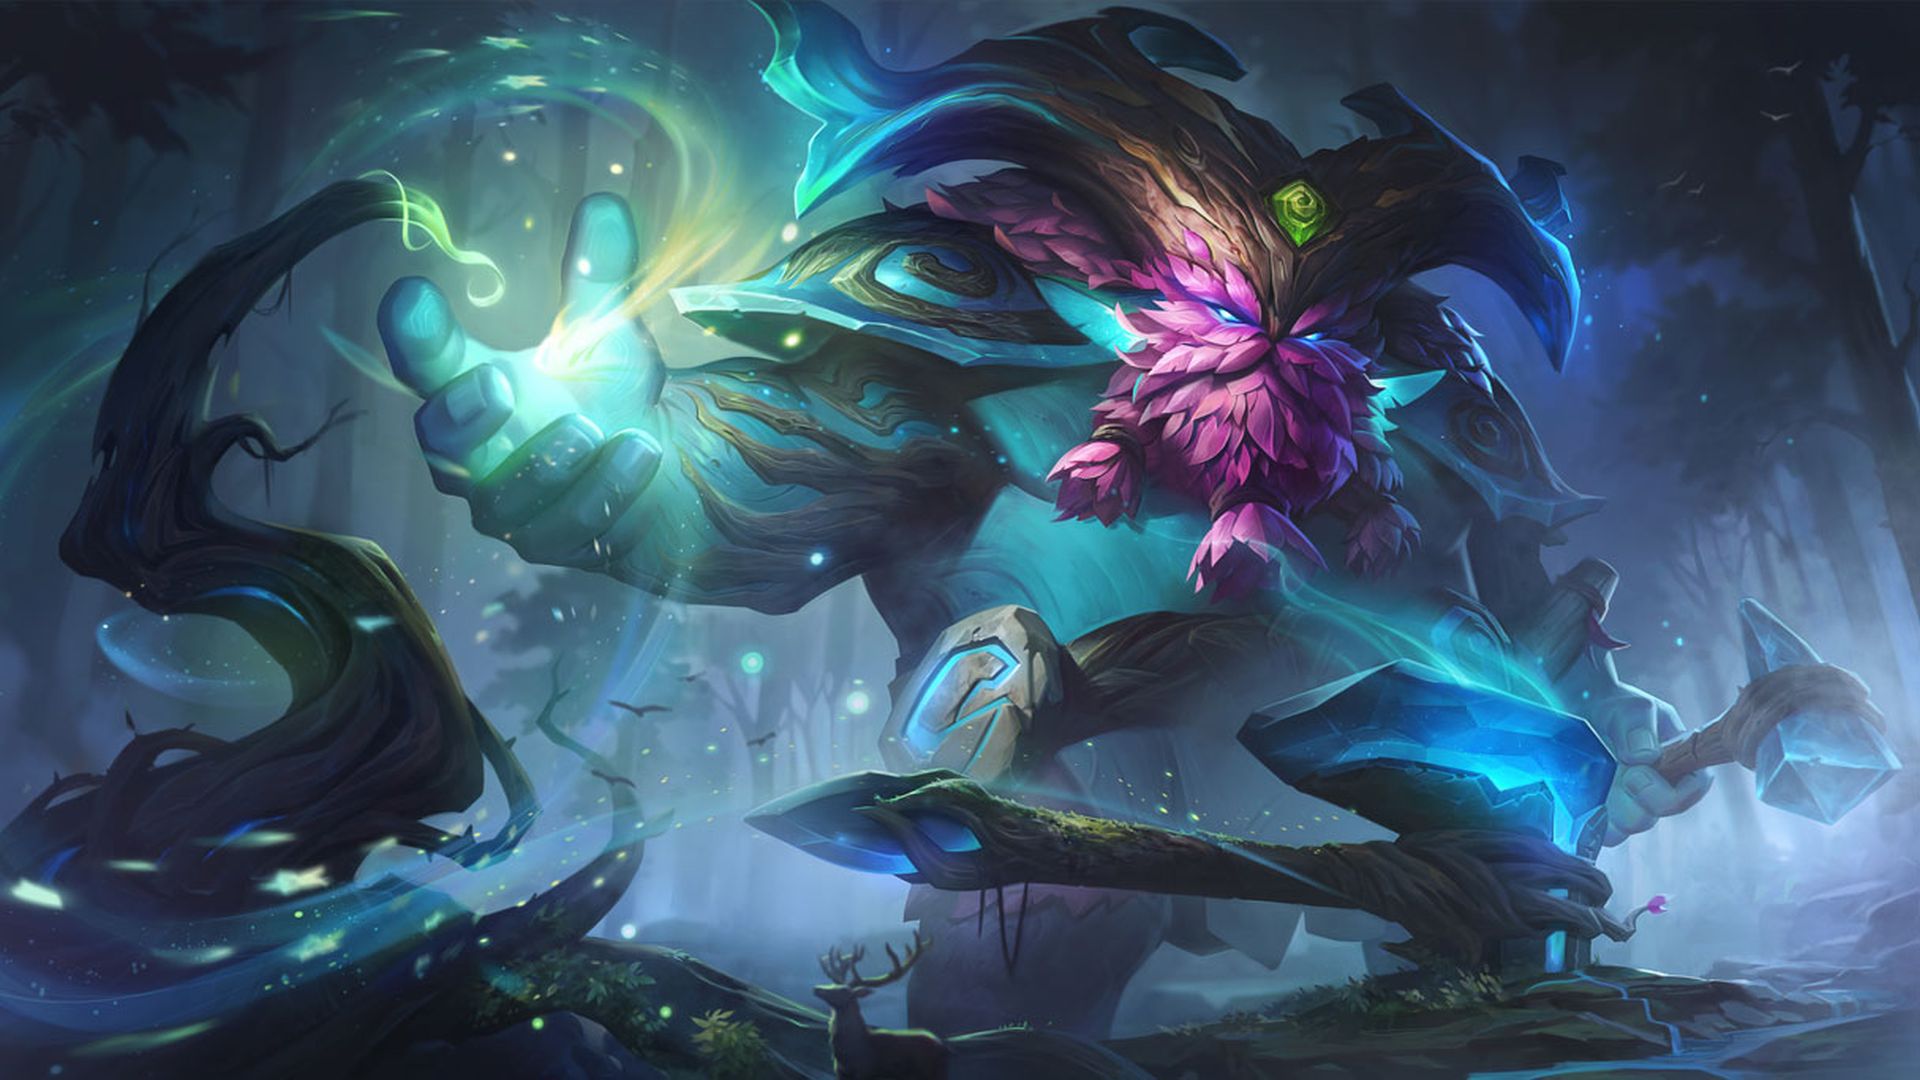 League of Legends' 10.25 Patch brings new champion Rell